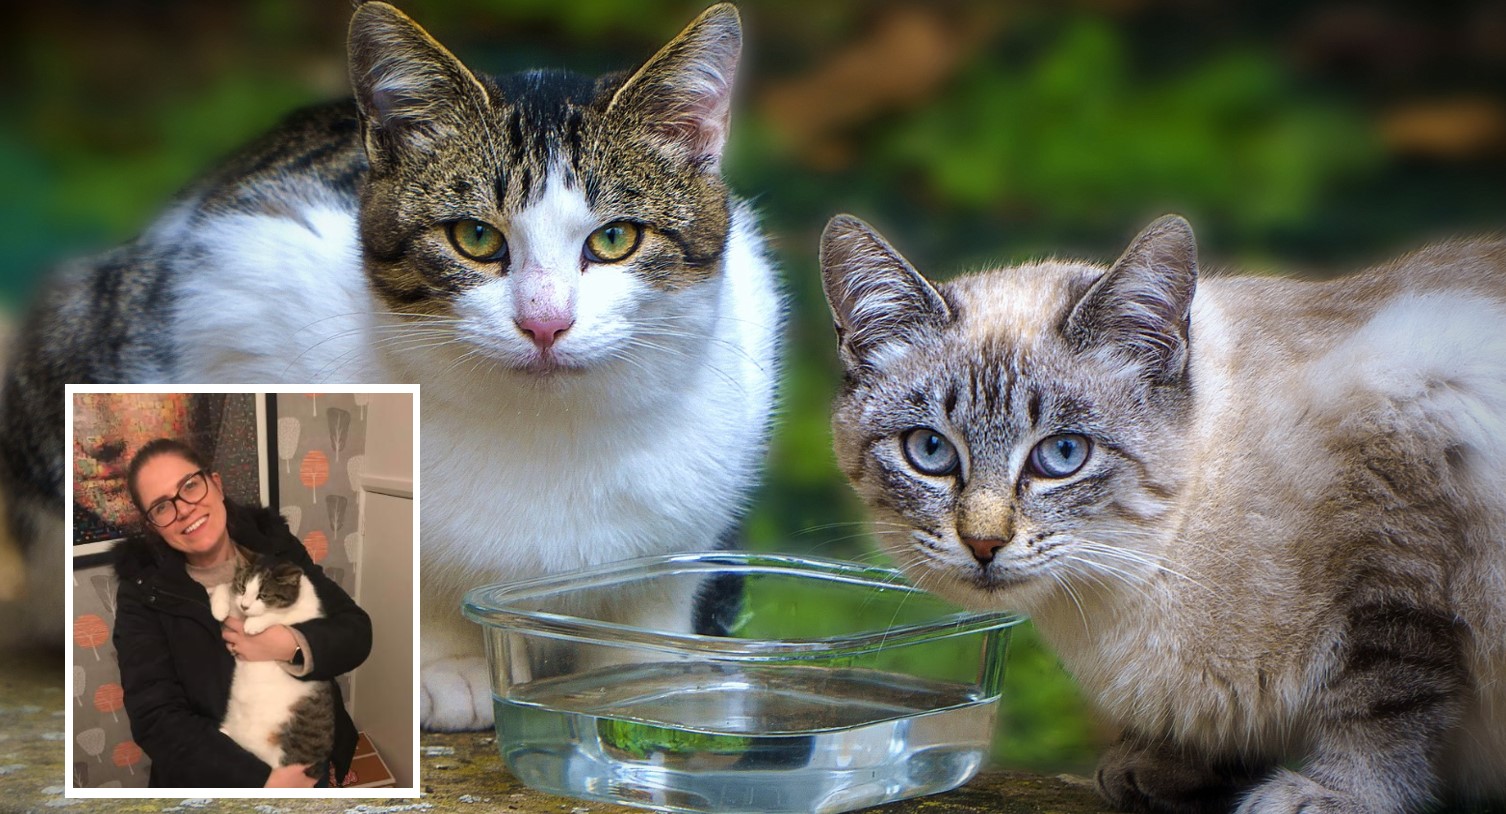 Two tabby cats outside at a glass drinking bowl with, inset, Emma Malone and her cat Charlie